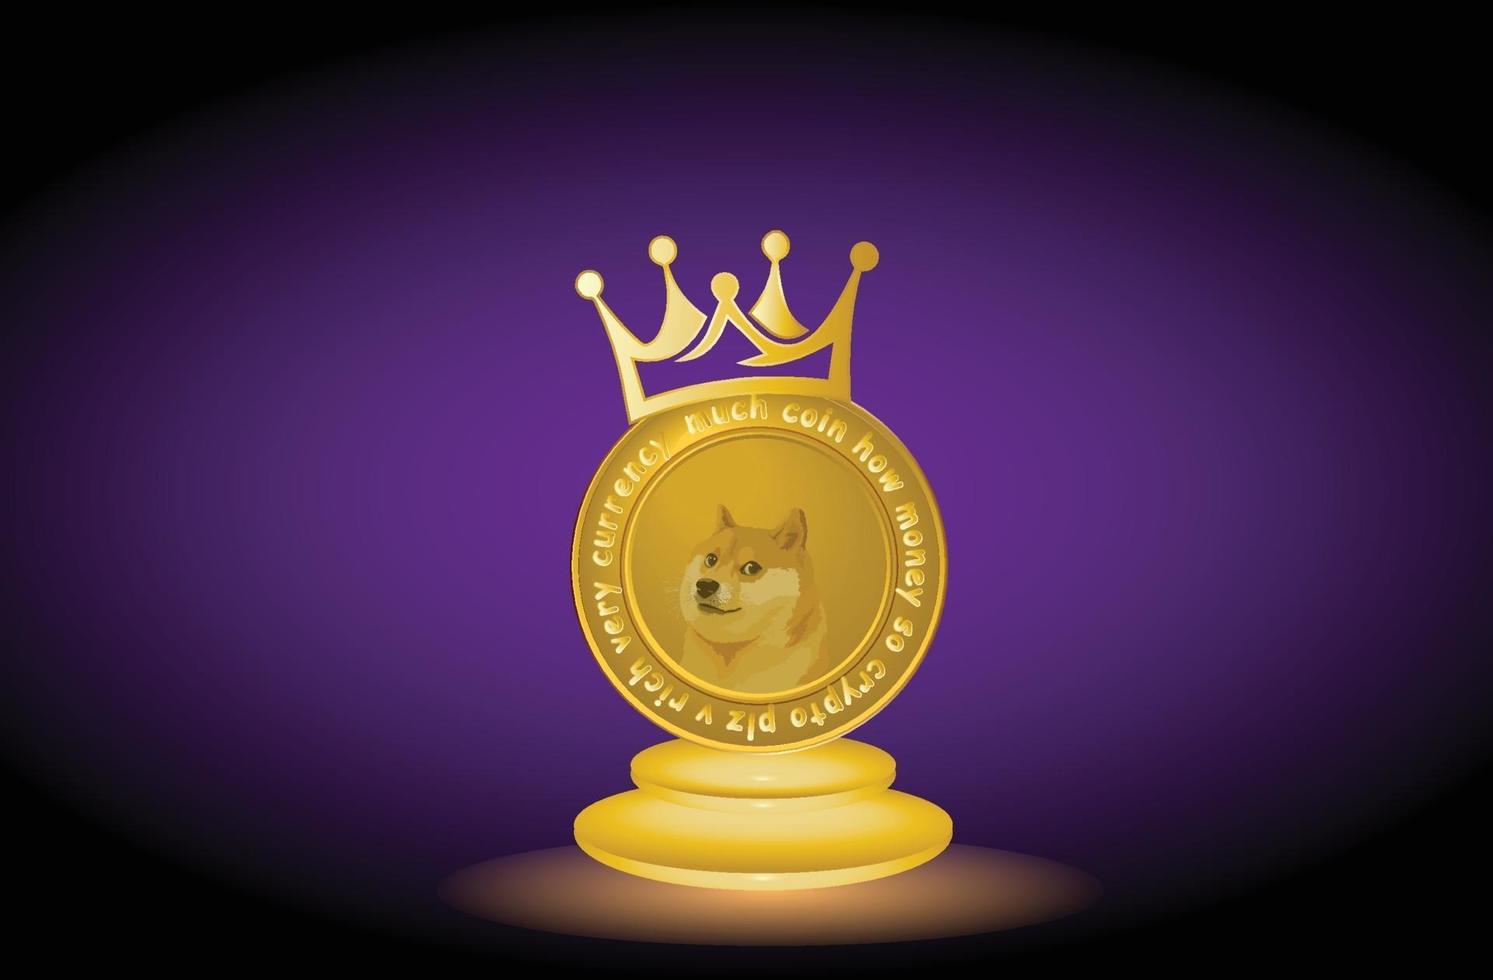 Doge coin frame with golden crown and shinning effect vector